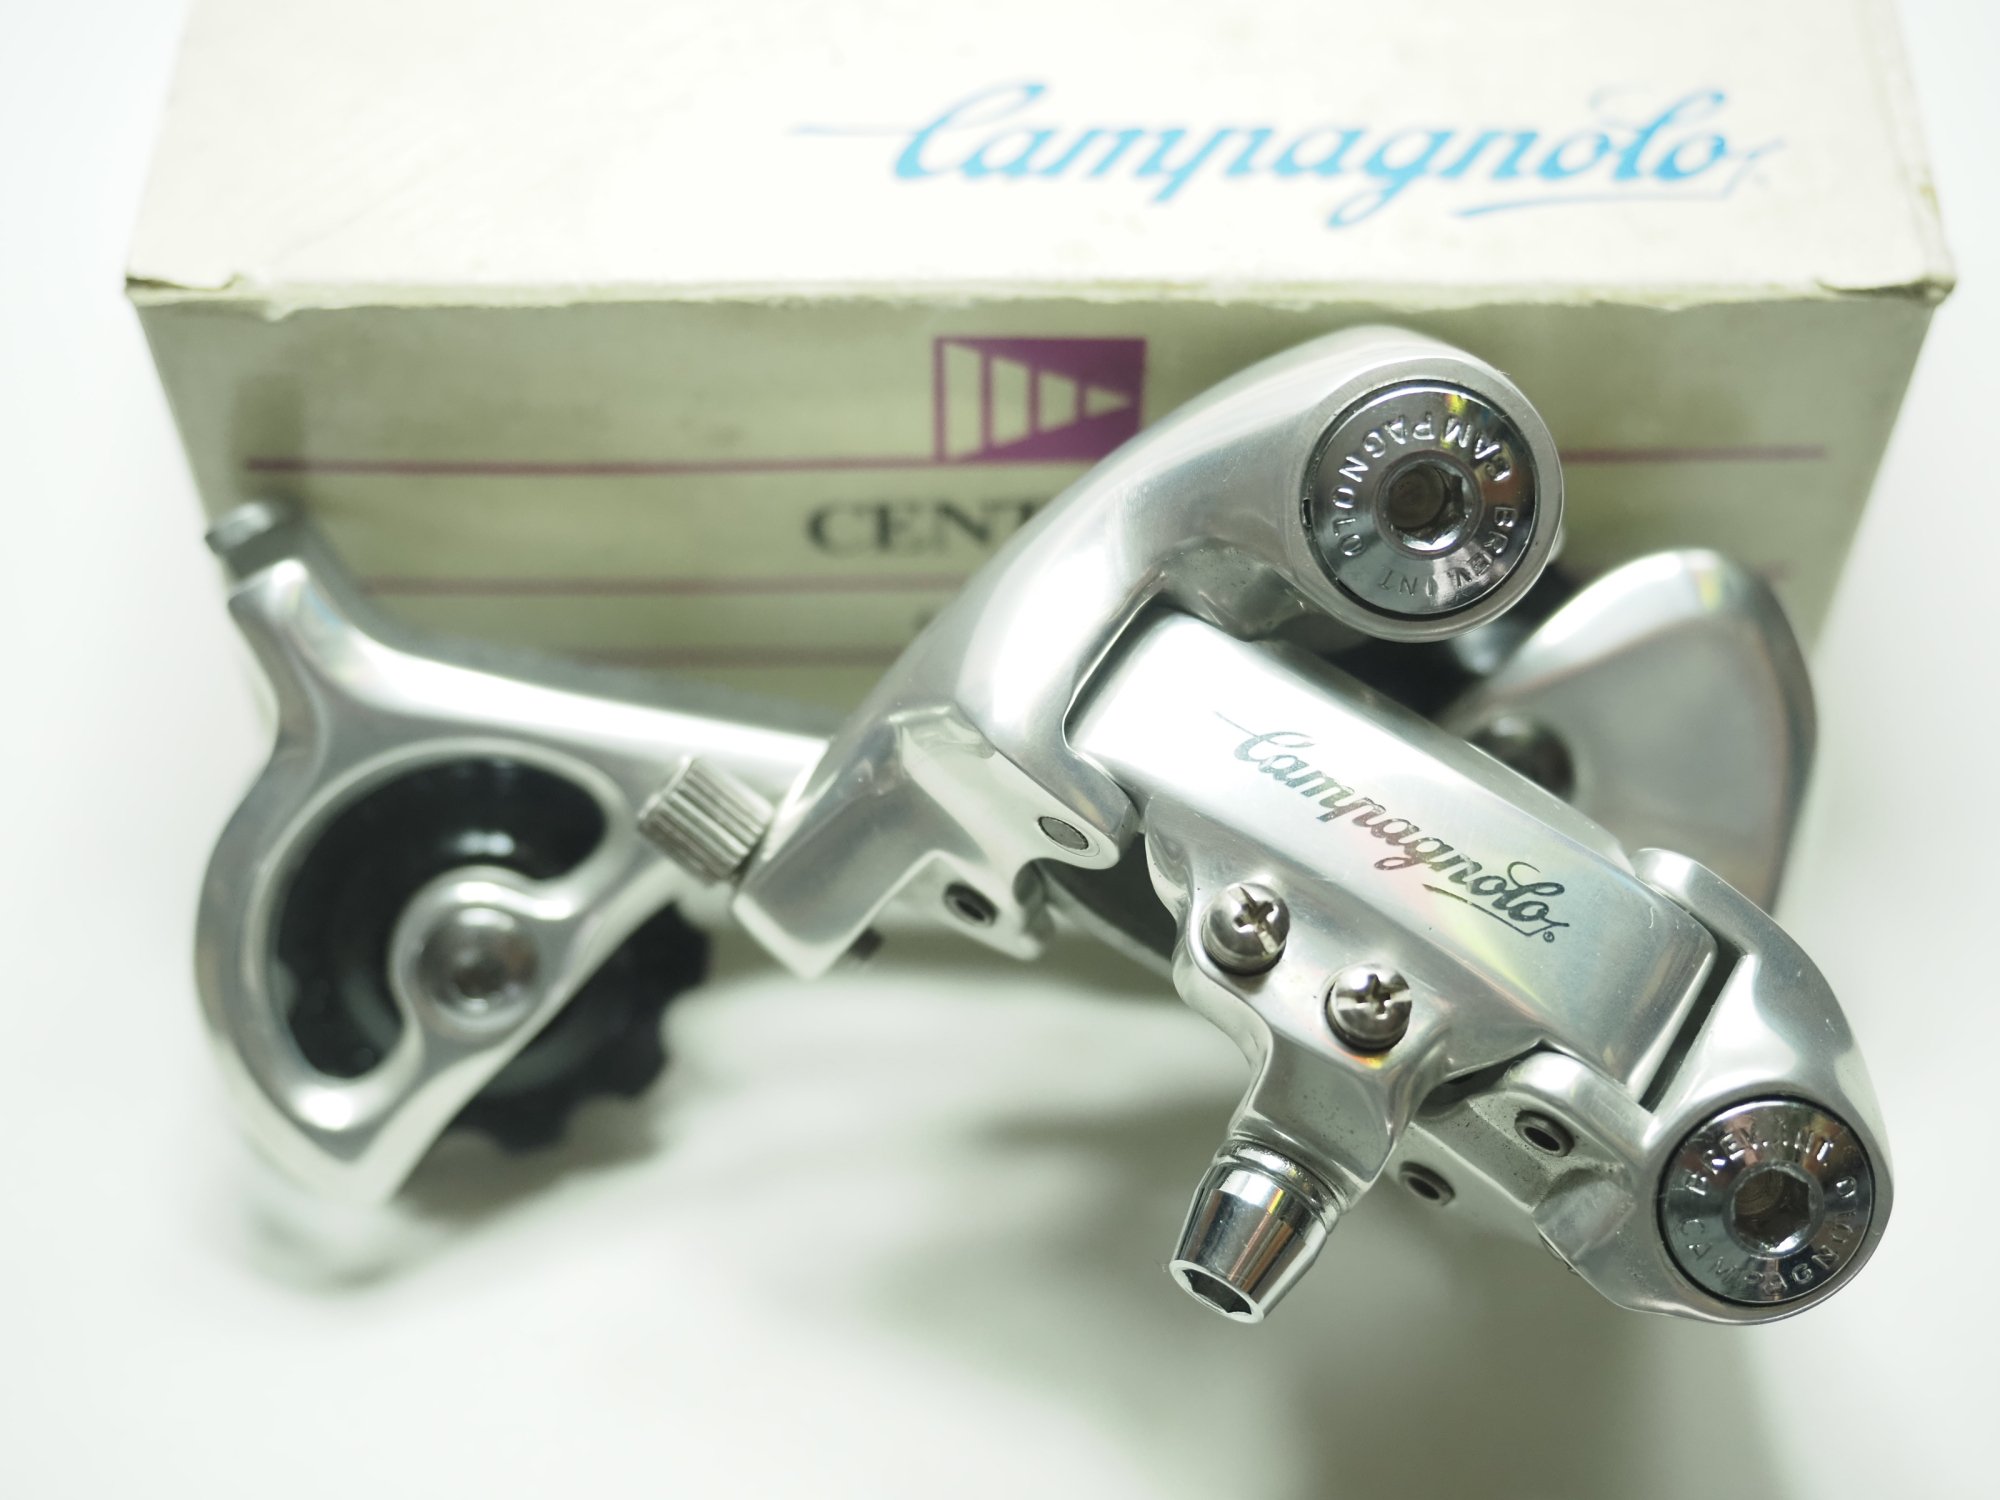 <img class='new_mark_img1' src='https://img.shop-pro.jp/img/new/icons32.gif' style='border:none;display:inline;margin:0px;padding:0px;width:auto;' />CAMPAGNOLO CENTAUR (Ĥ1)